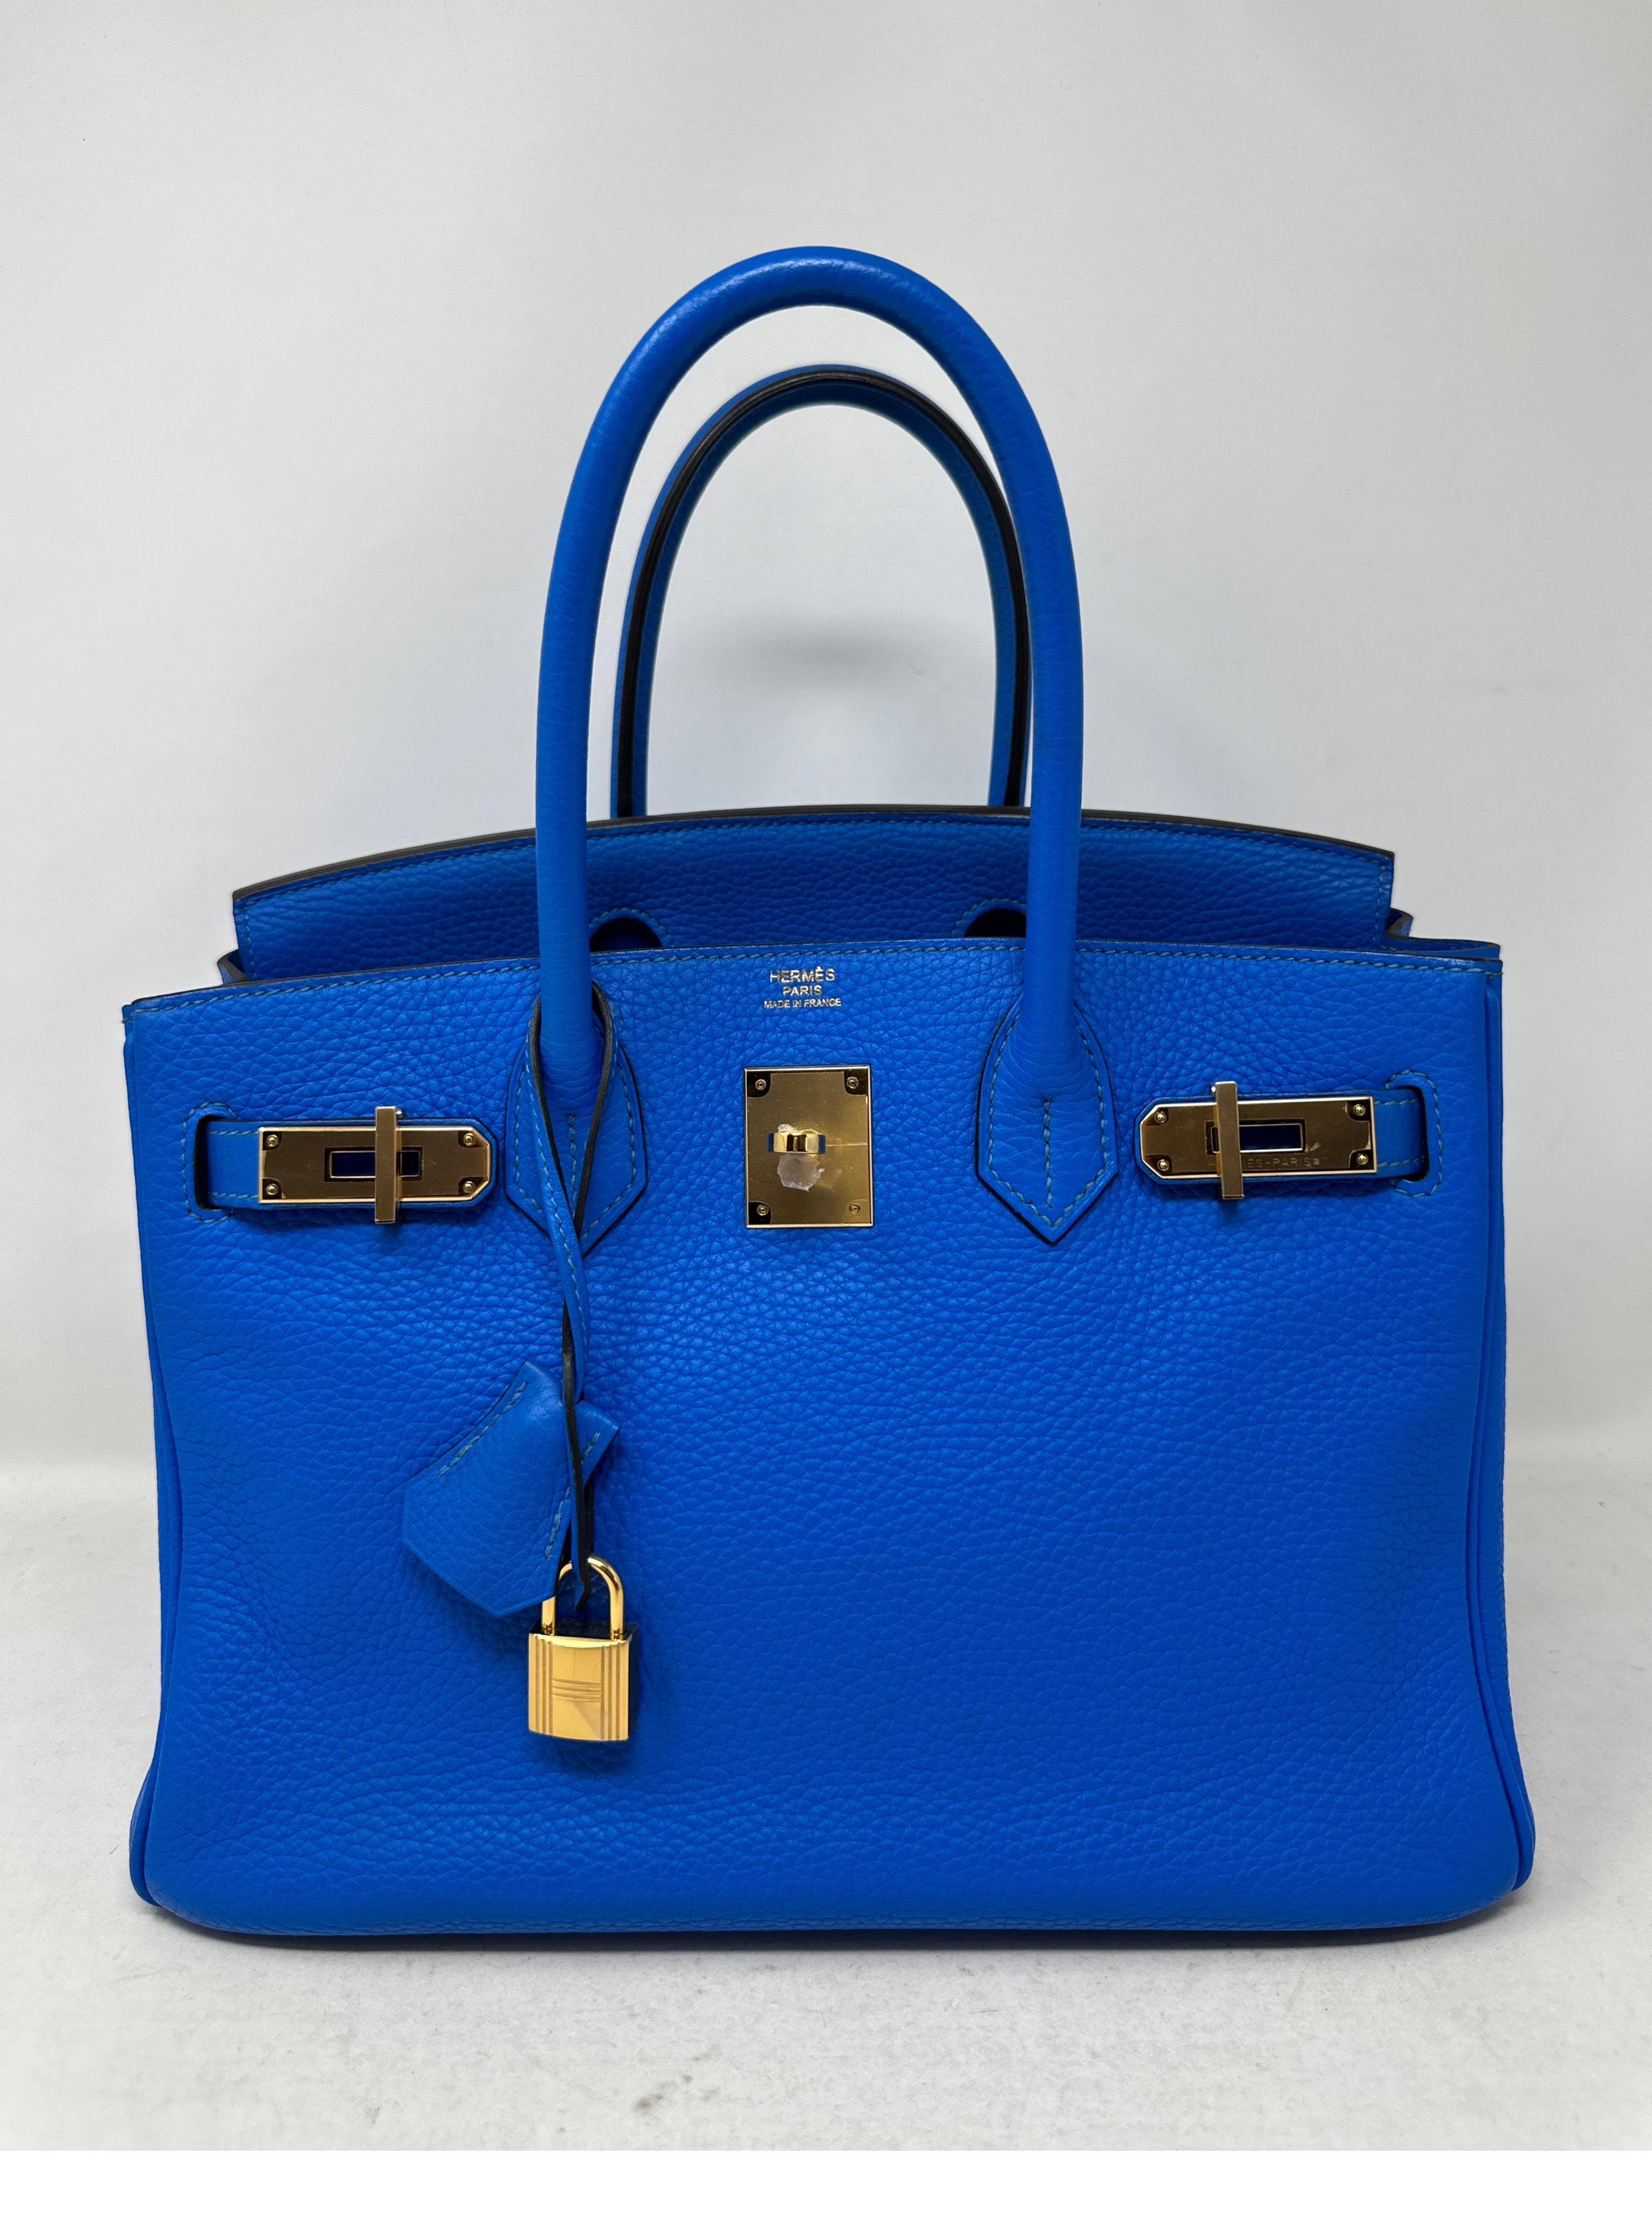 Hermes Blue Hydra Birkin 30 Bag. Vibrant blue color Birkin. Excellent condition. Gold hardware. Plastic is still on the hardware. Interior is mint and clean. Rare blue color and size. Includes clochette, lock, keys, and dust bag. Guaranteed